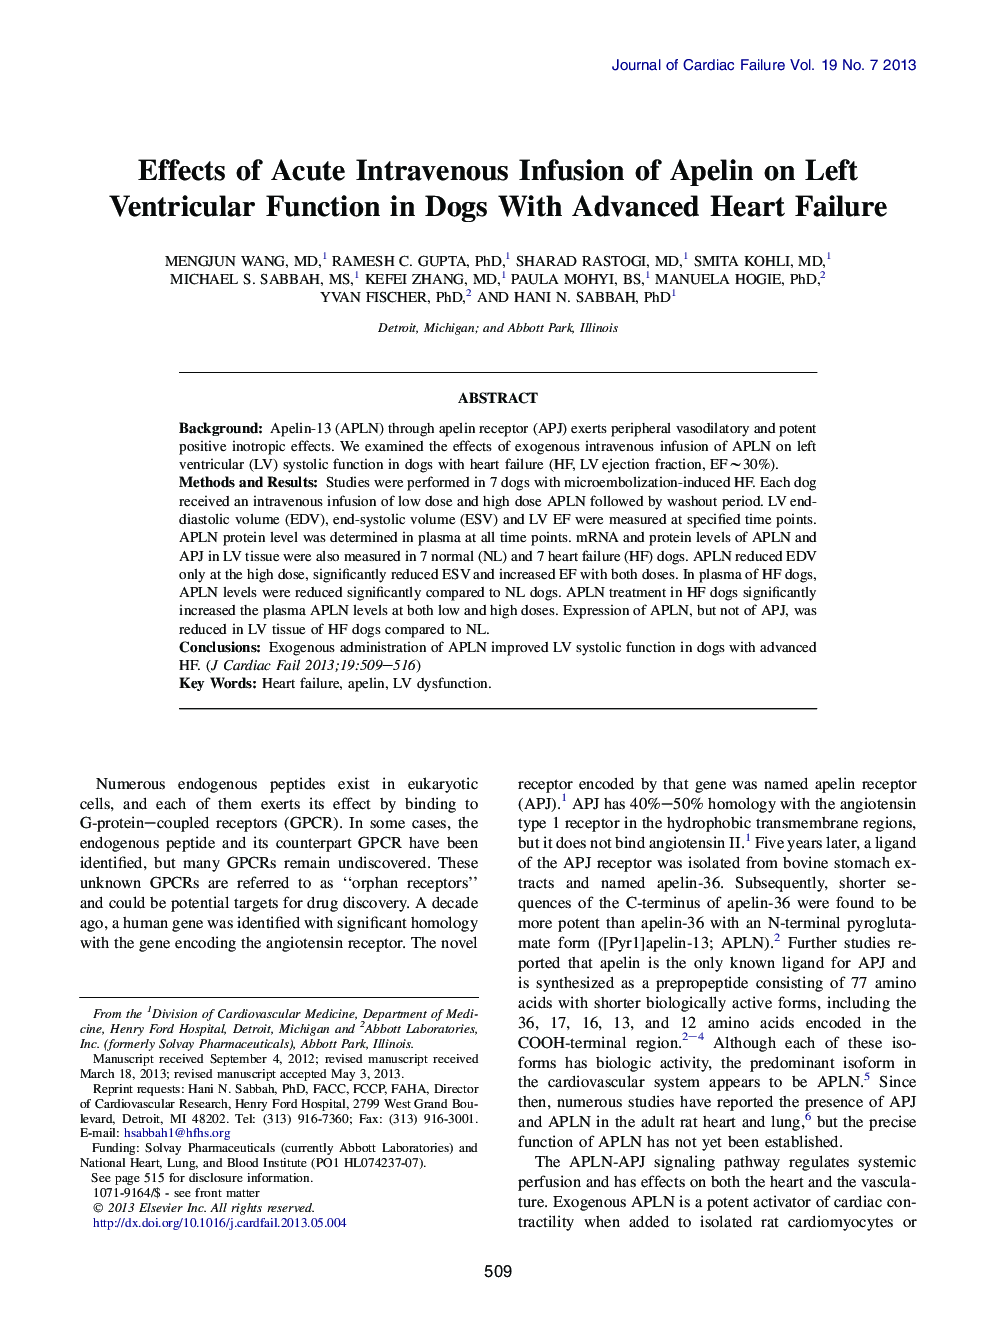 Effects of Acute Intravenous Infusion of Apelin on Left Ventricular Function in Dogs With Advanced Heart Failure